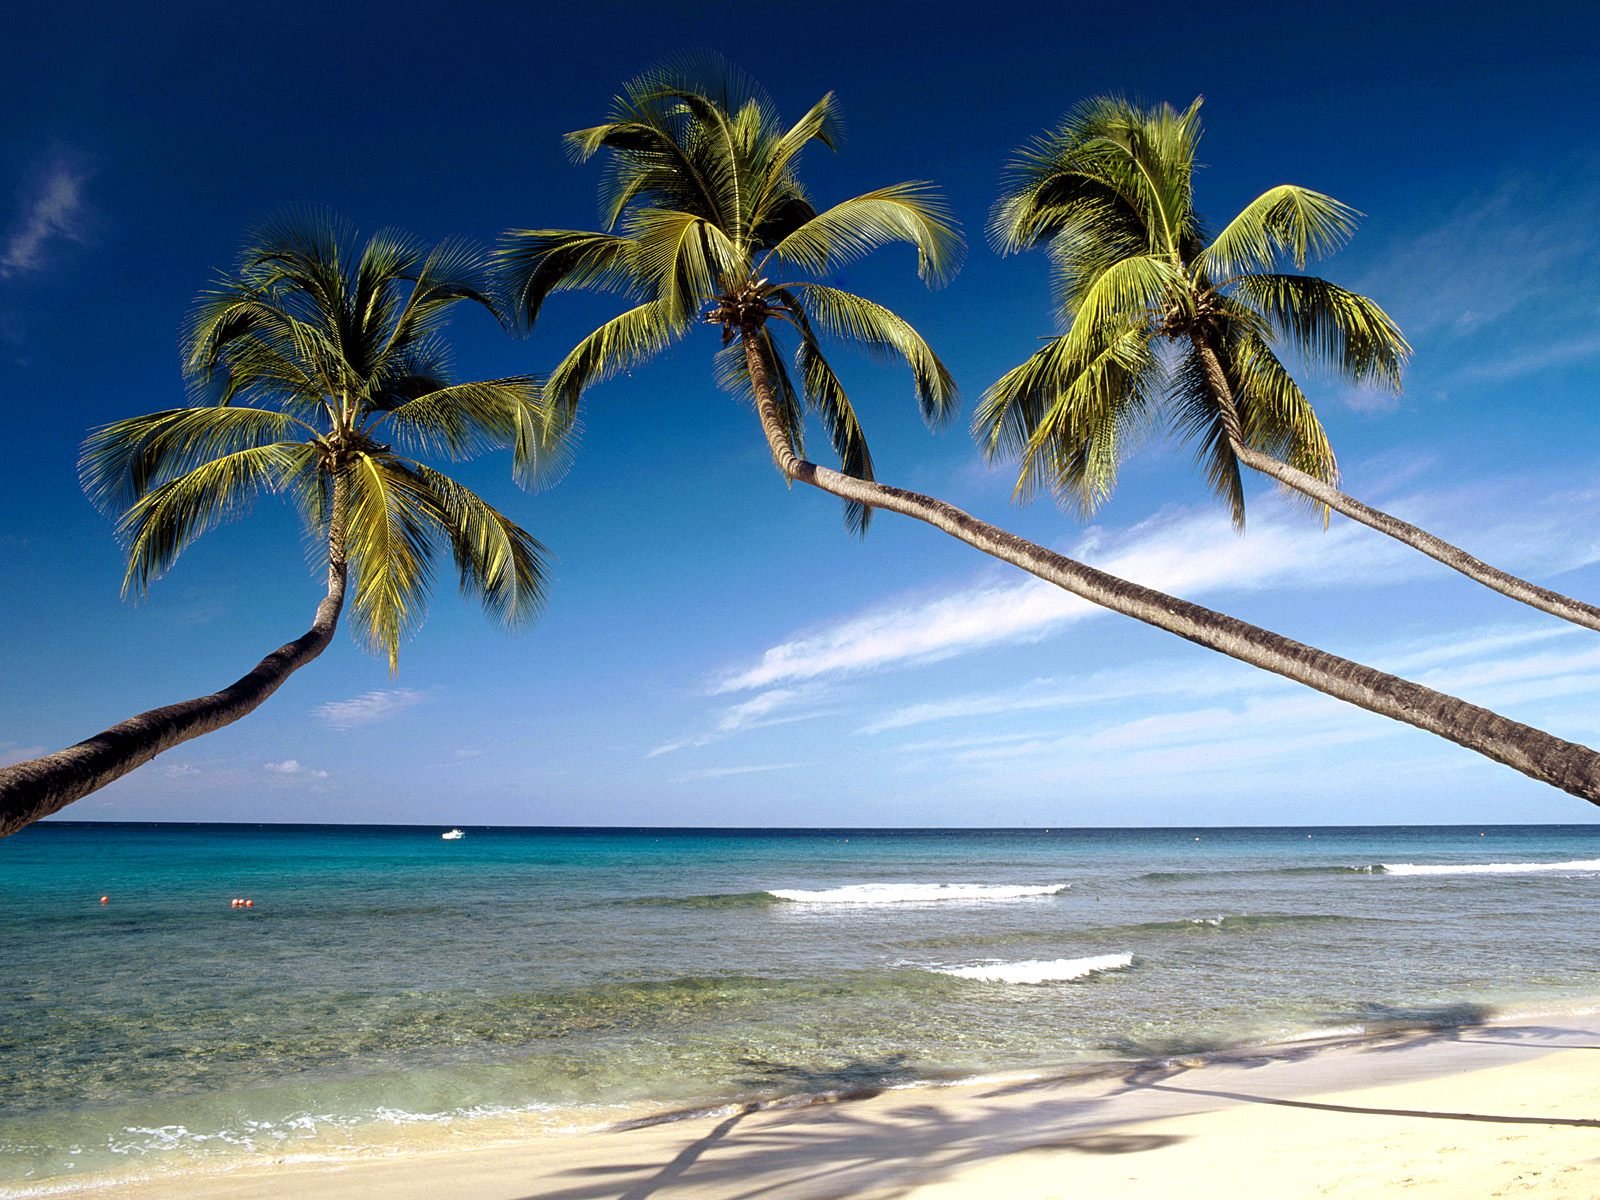 Caribbean beach wallpaper The Free Images